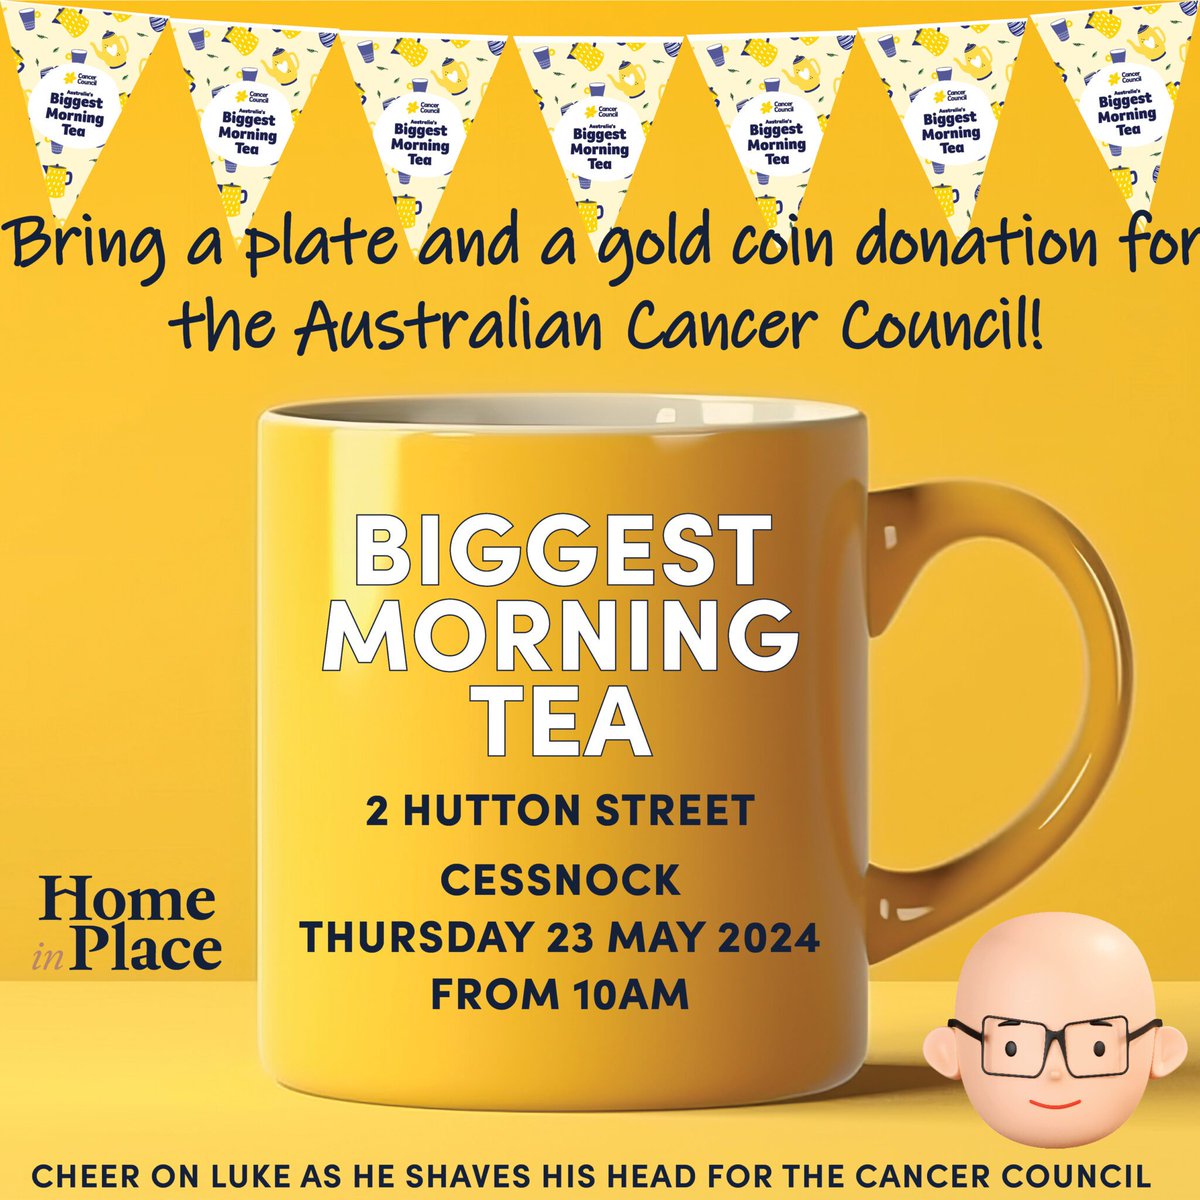 Join us tomorrow for a Biggest Morning Tea! 2 Hutton Street Cessnock Thursday 23 May 2024 from 10am Bring a plate and a gold coin donation for the Australian Cancer Council.